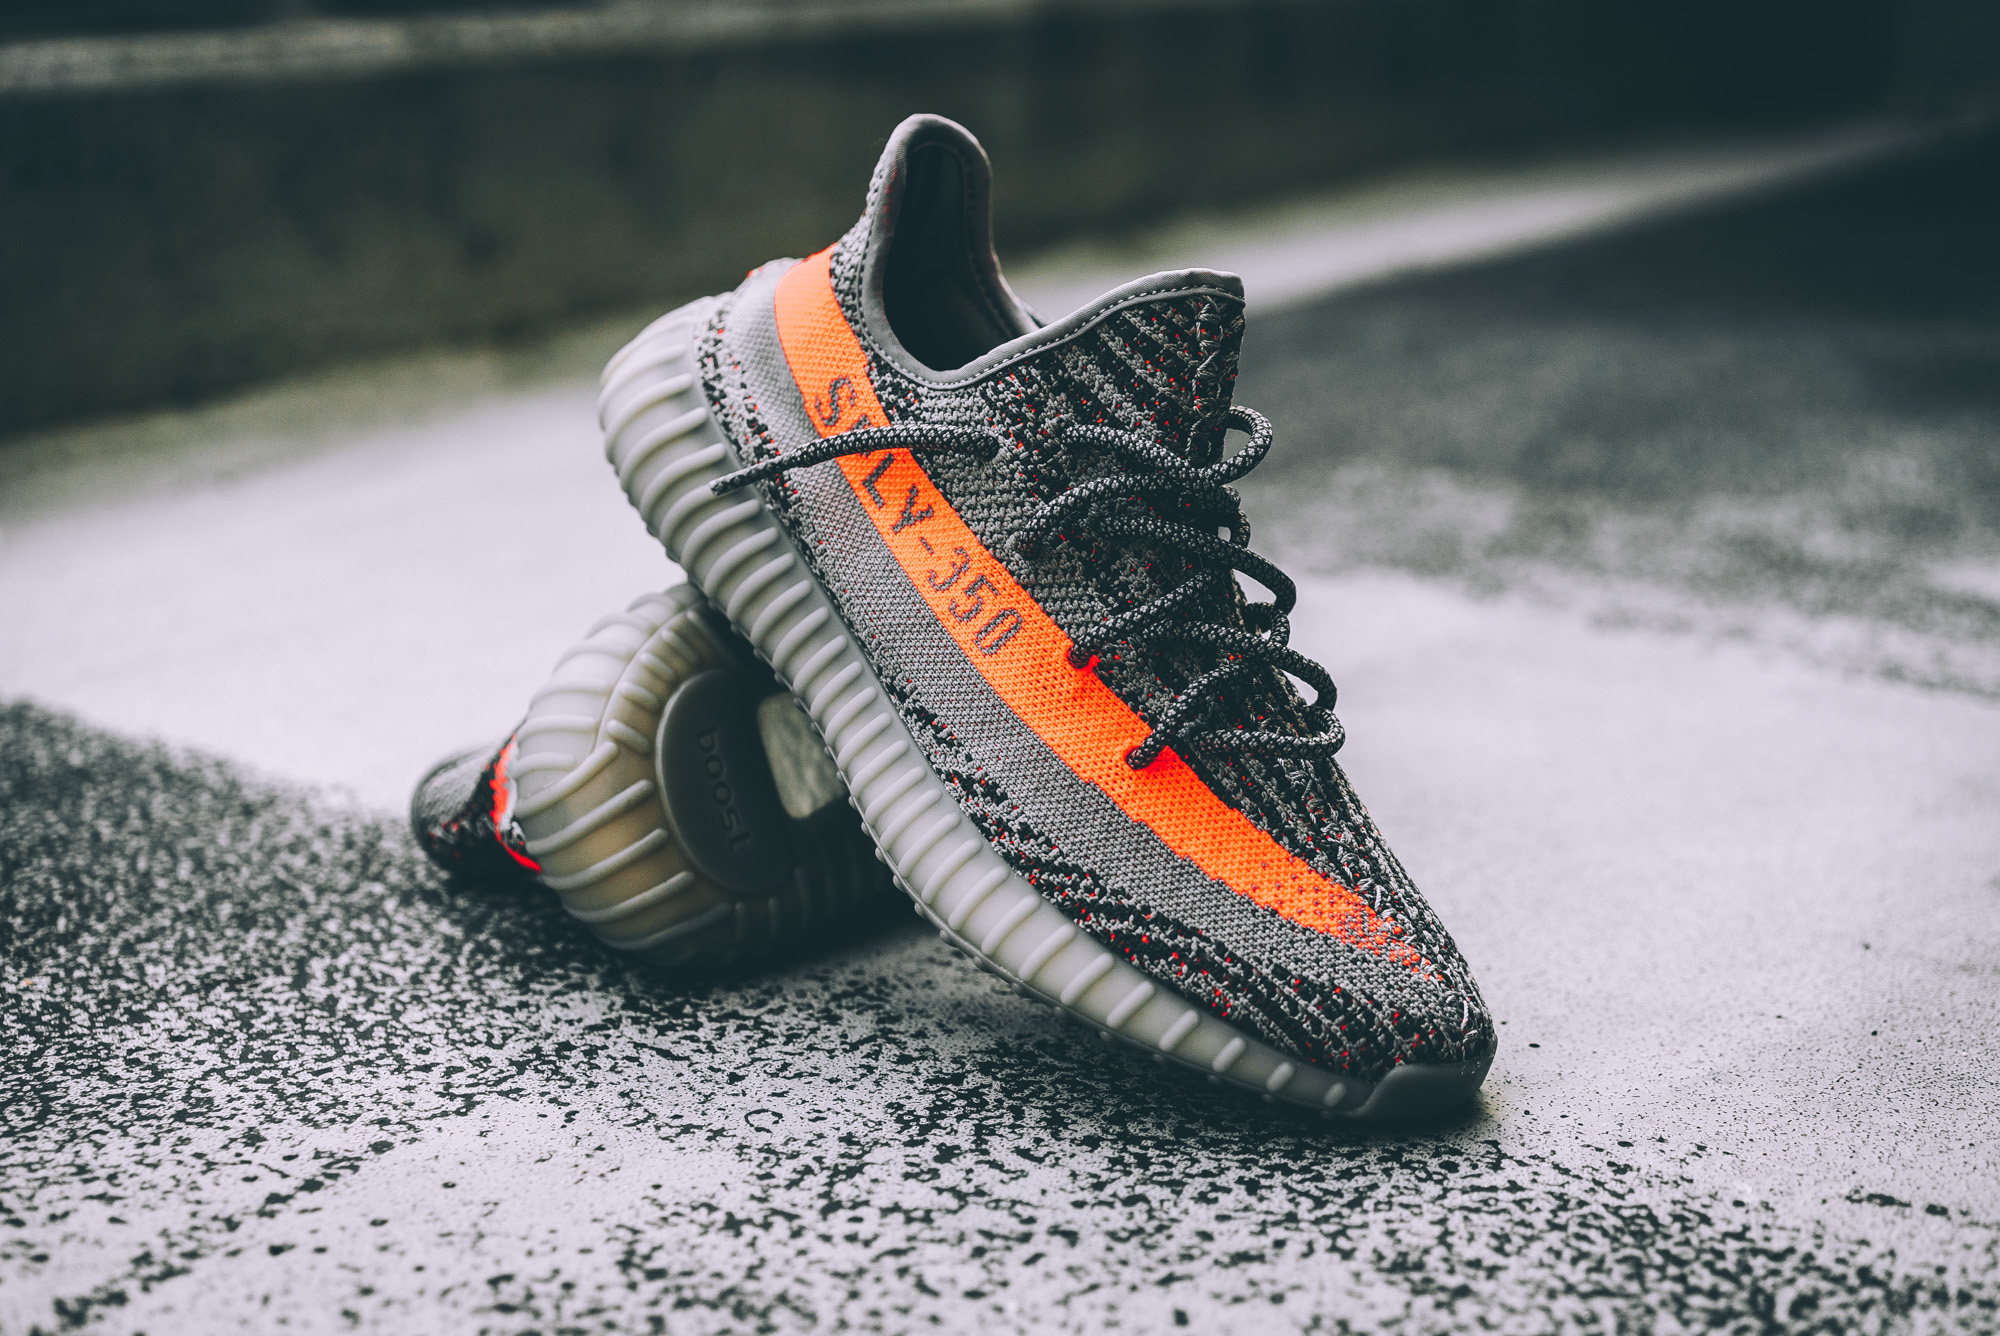 Cheap Authentic Yeezy 350 V2 Shoes for Sale, Cheap Yeezys 350 Boost